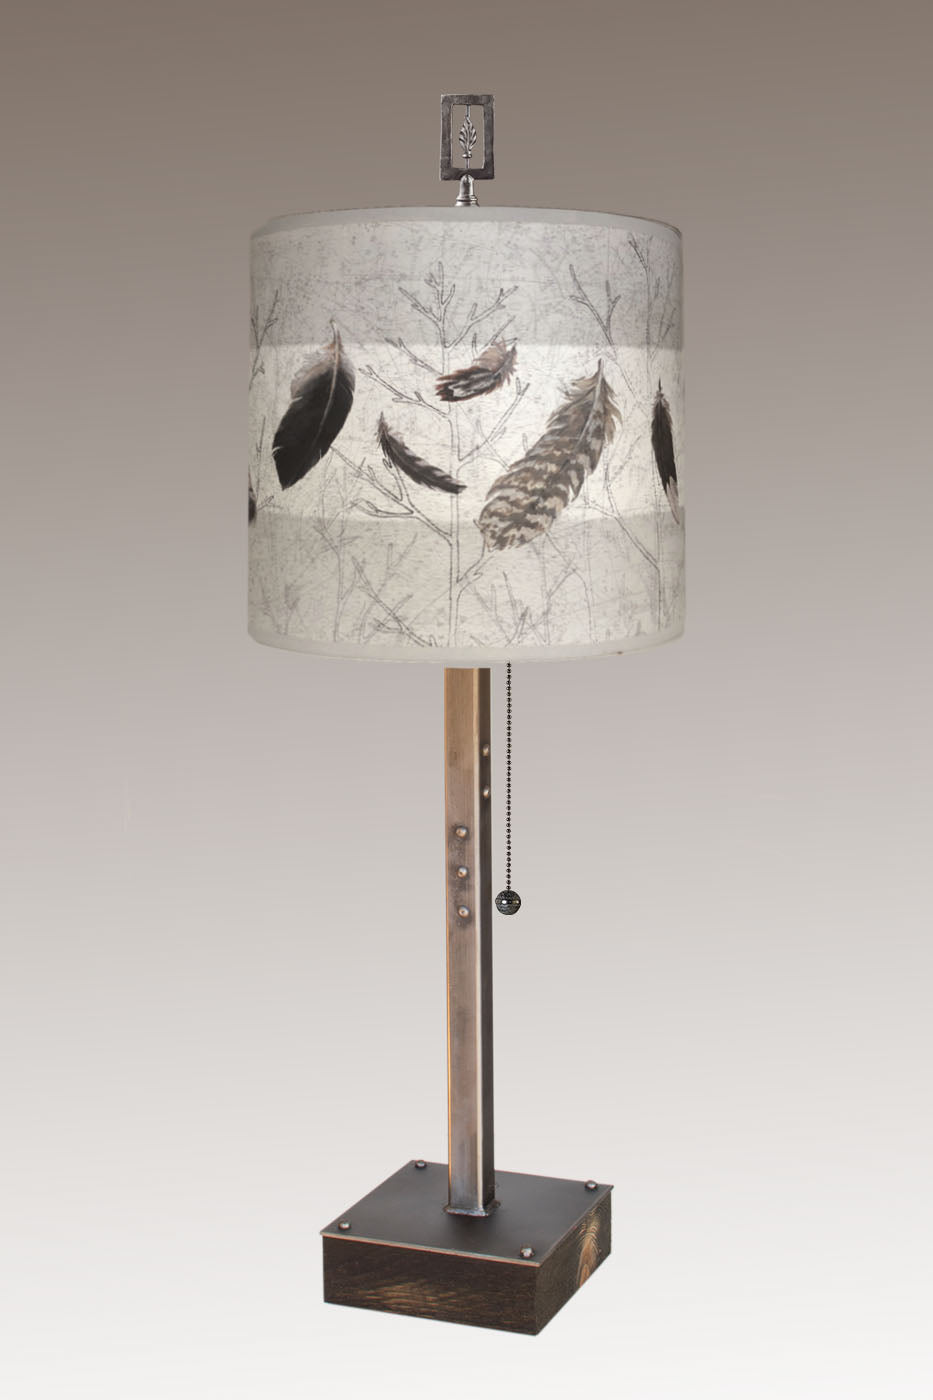 Janna Ugone &amp; Co Table Lamps Steel Table Lamp on Wood with Medium Drum Shade in Feathers in Pebble